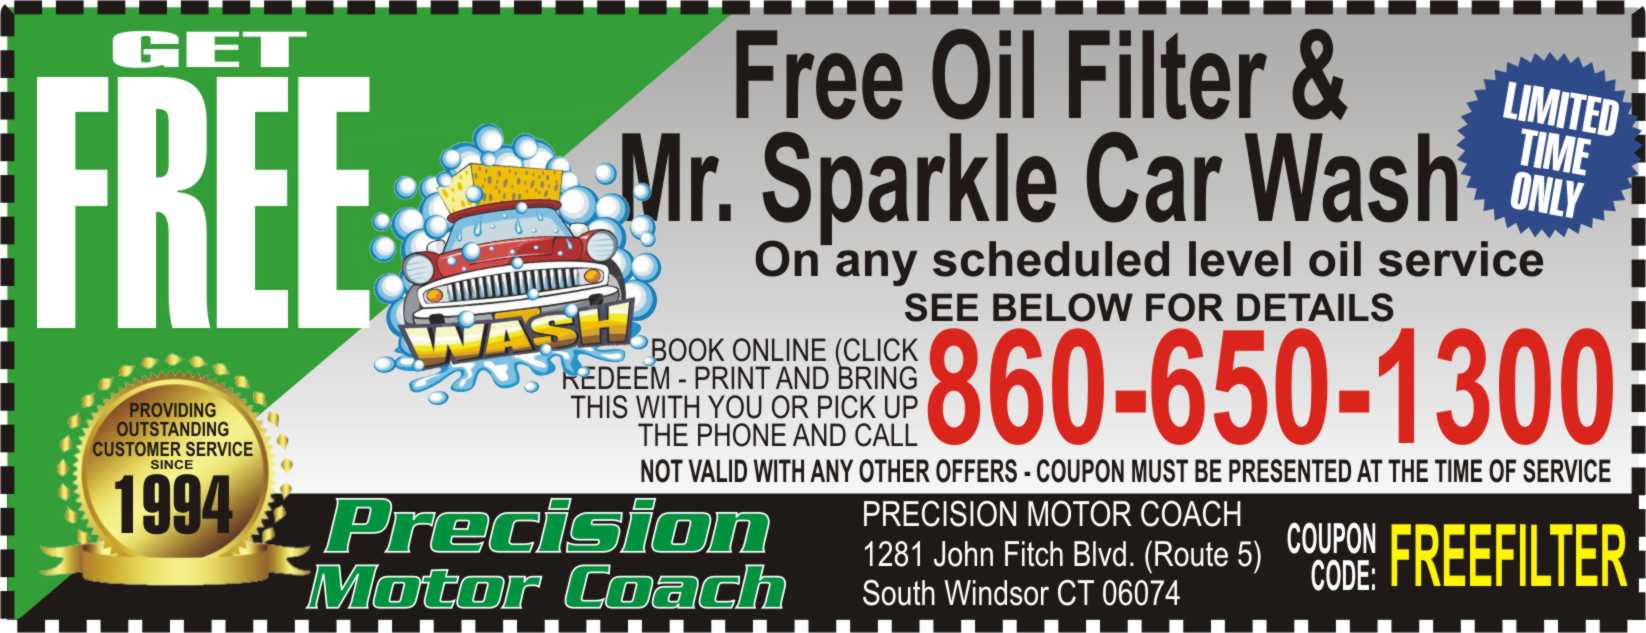 Coupons - Oil Change Coupons - Save money with these coupons